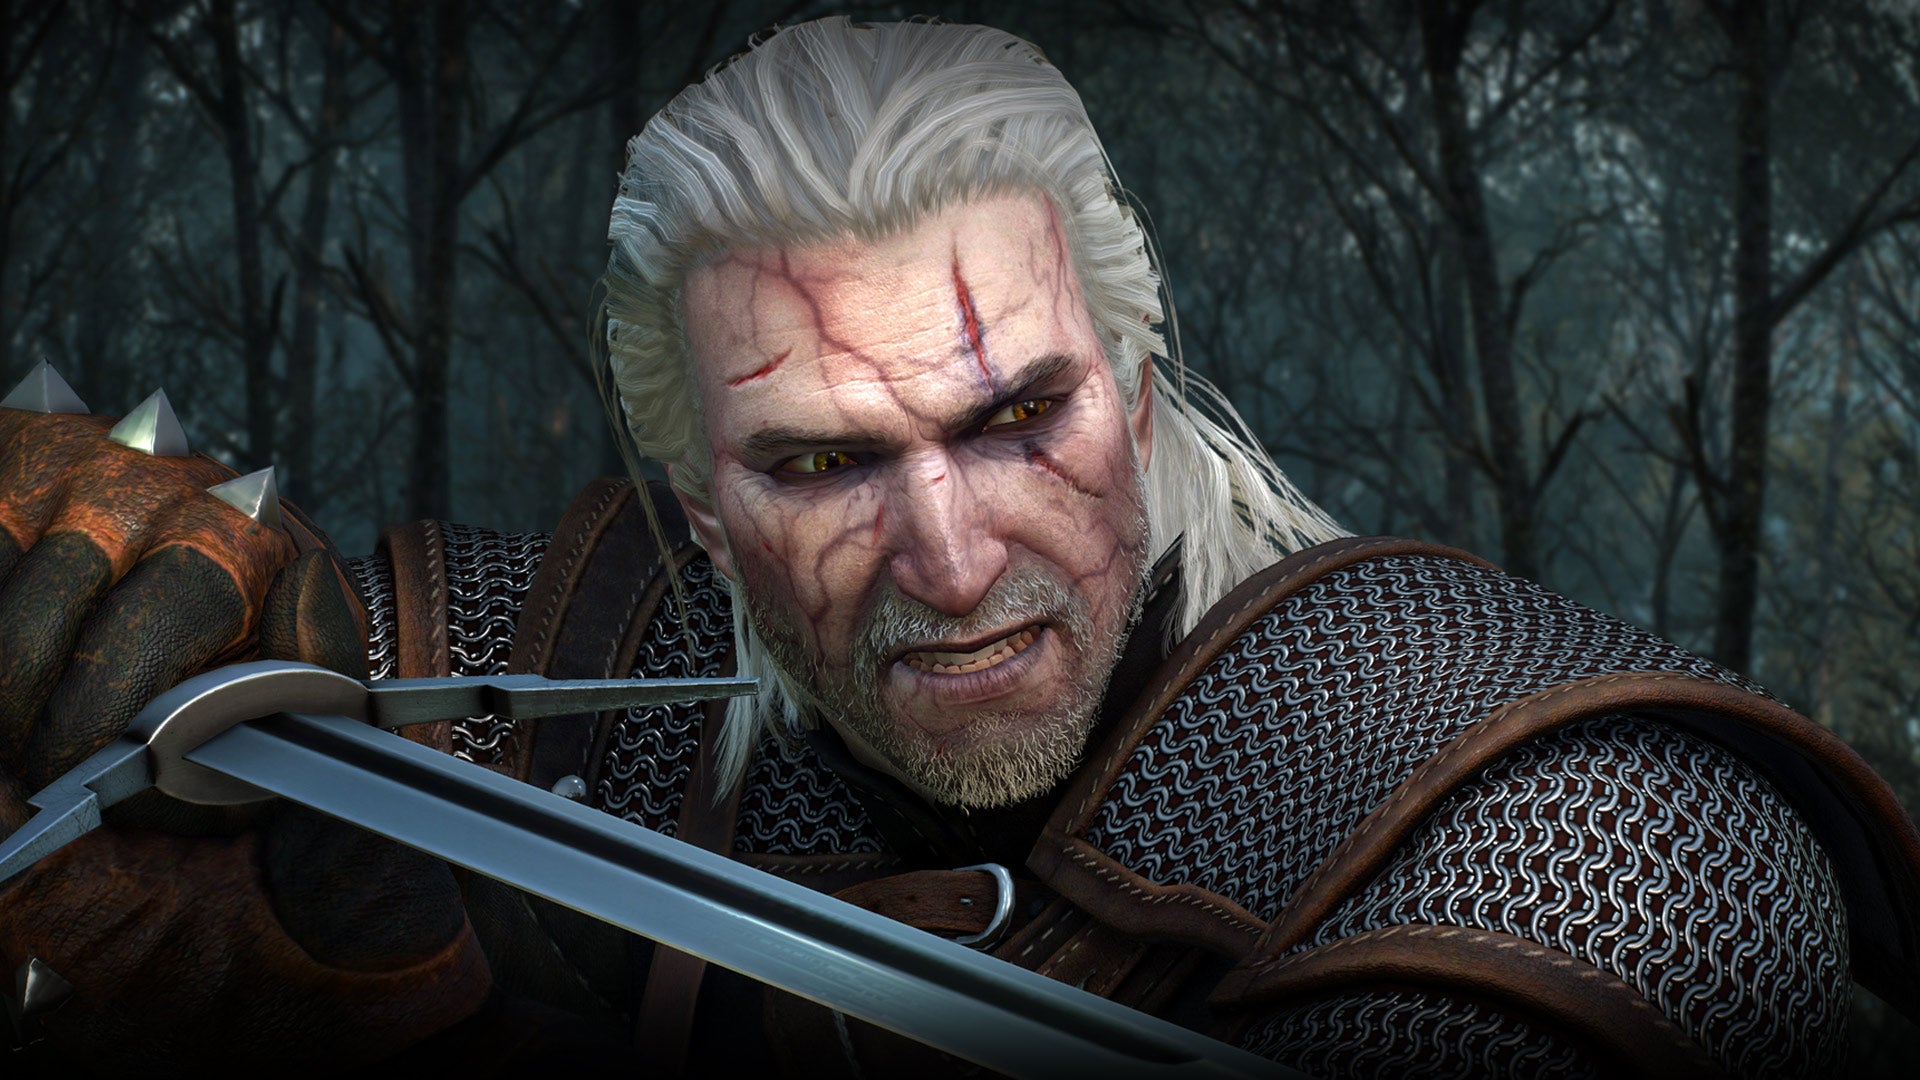 Image for Geralt's short attention span and sidequest obsession in The Witcher 3 is backed up by book lore